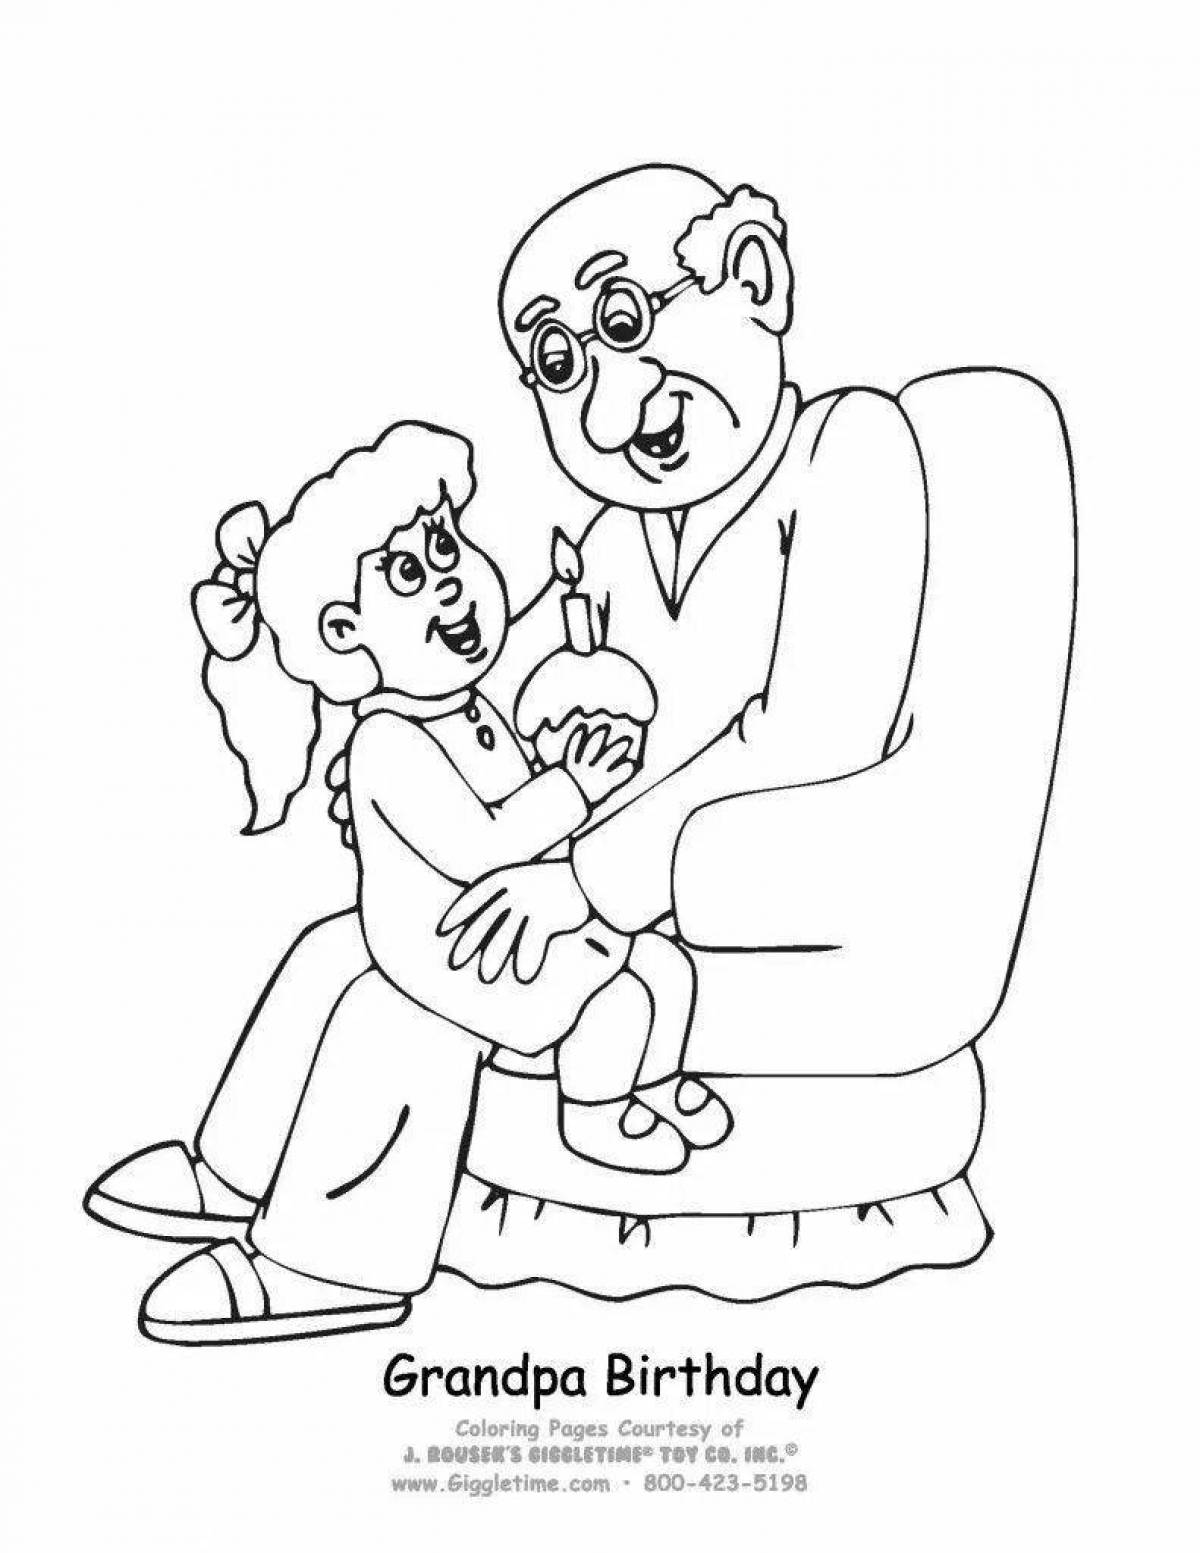 Glorious grandfather's birthday coloring page from granddaughter